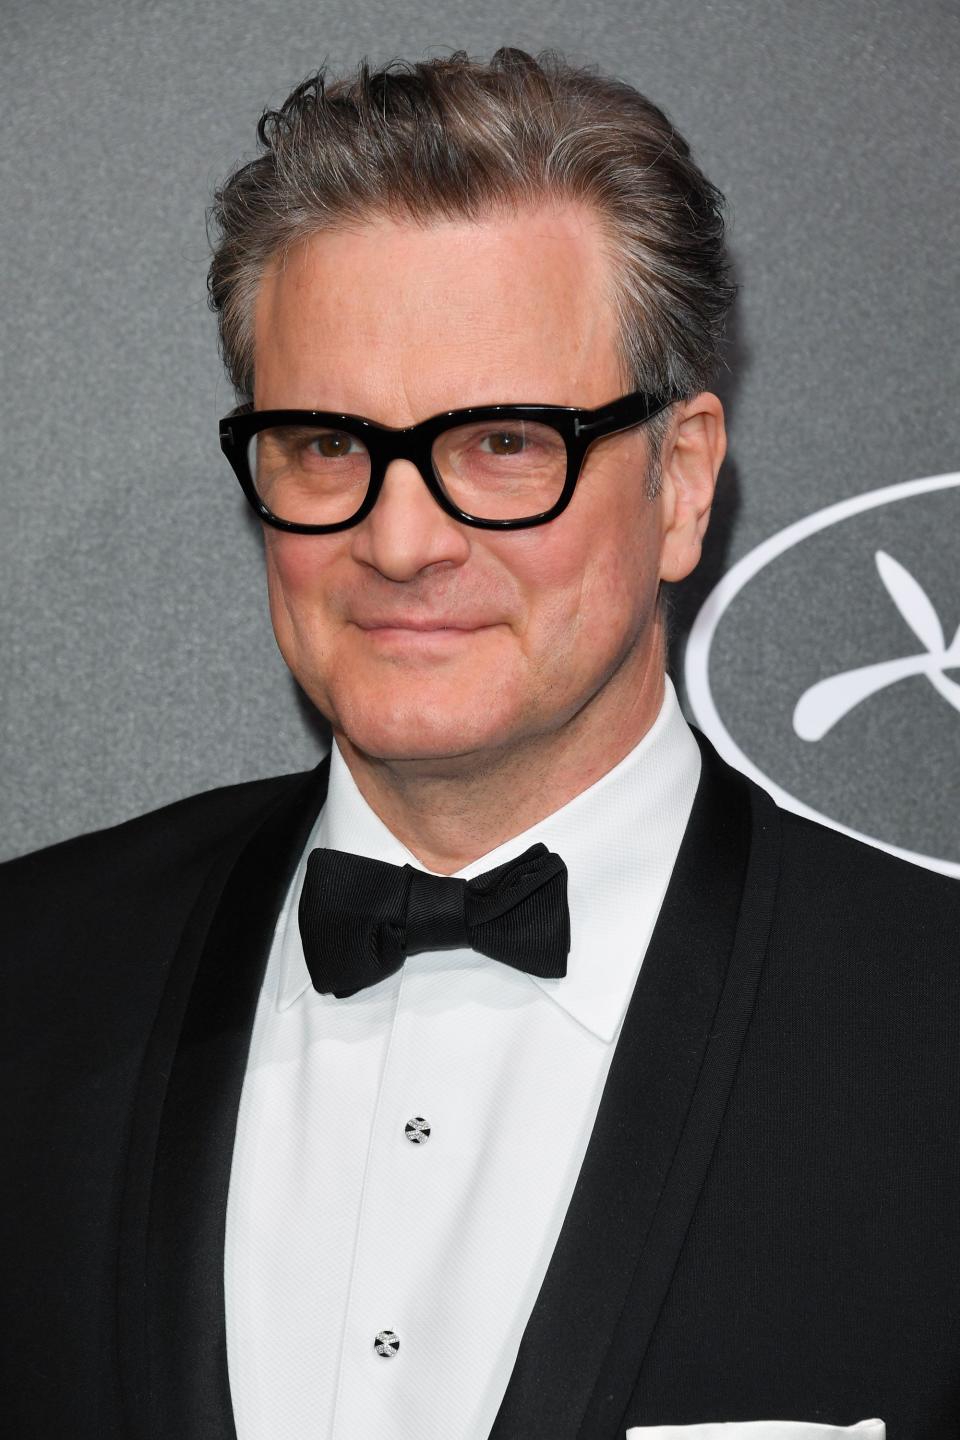 Looking fabulous as ever, Colin Firth stuns in black suit and pant with a white inner-wear